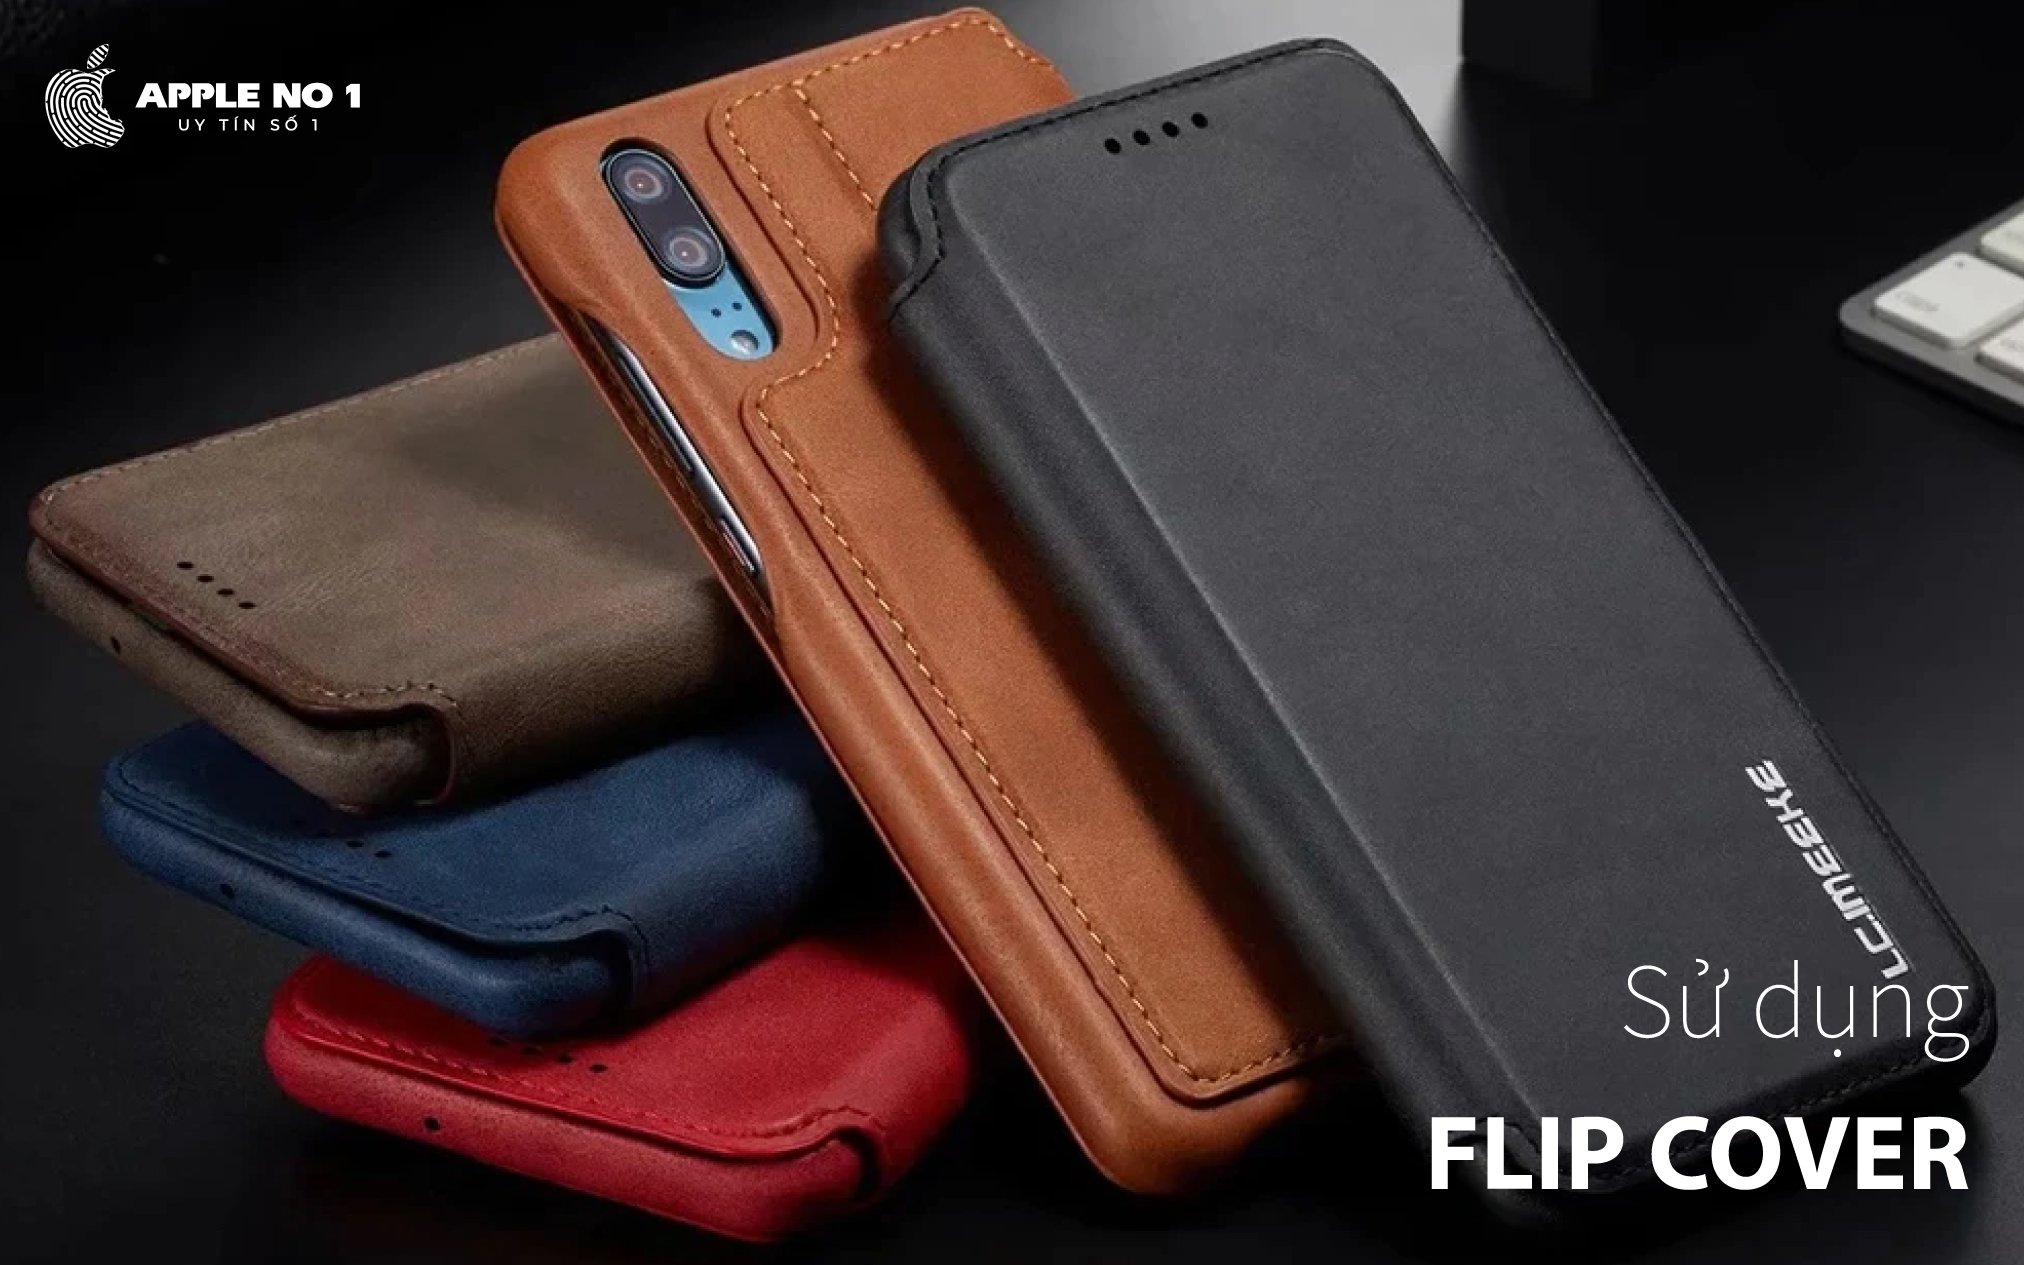 su dung flip cover iphone xr